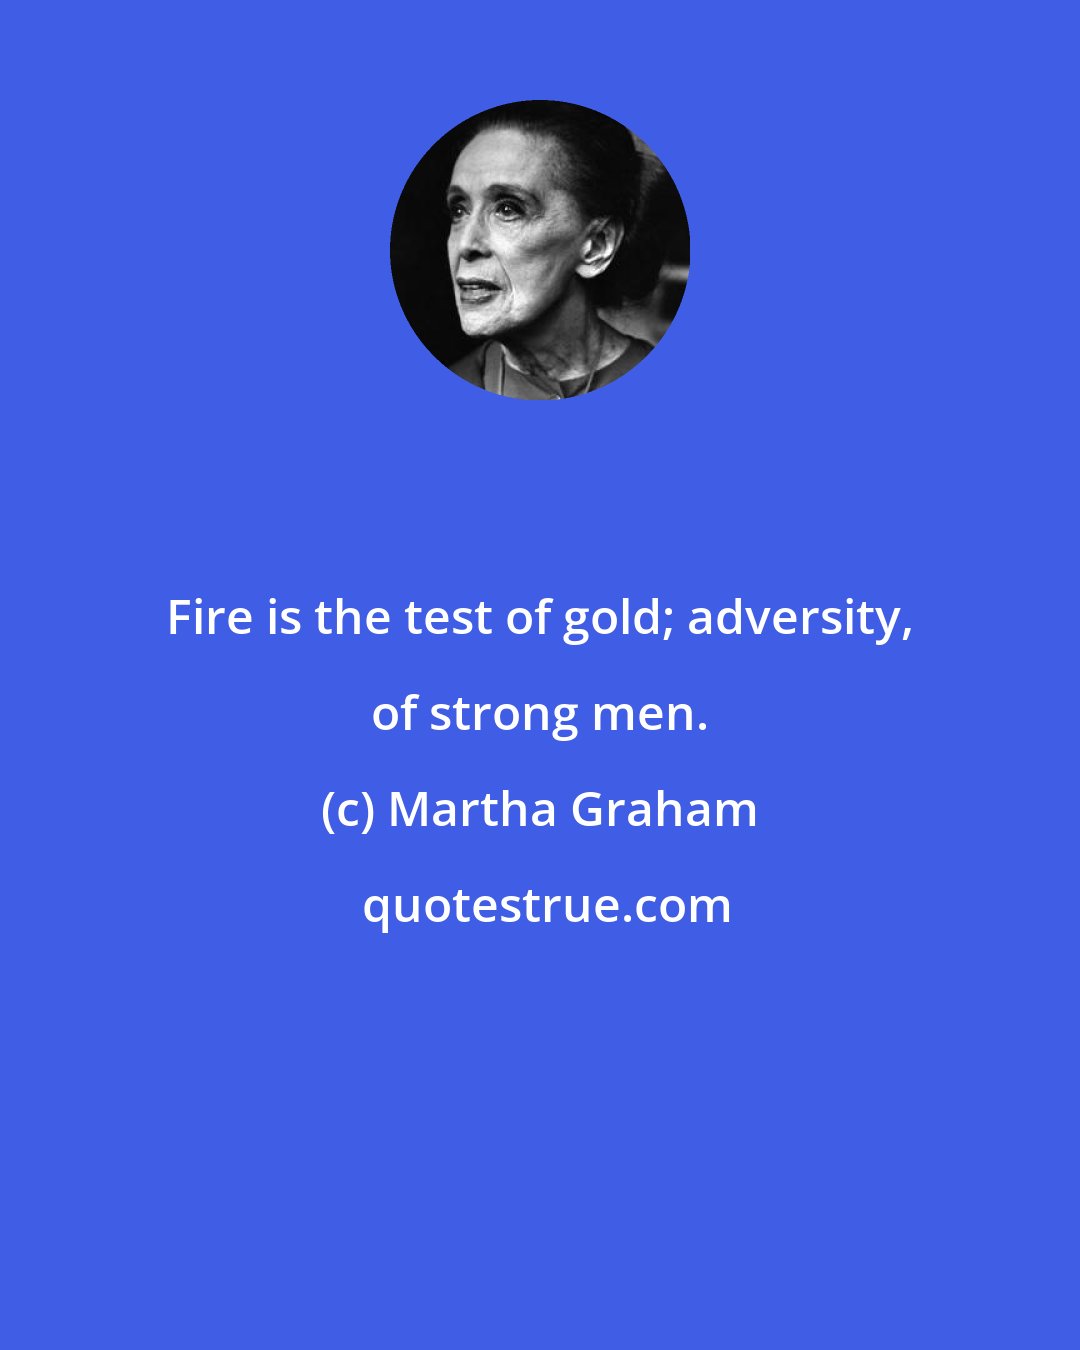 Martha Graham: Fire is the test of gold; adversity, of strong men.